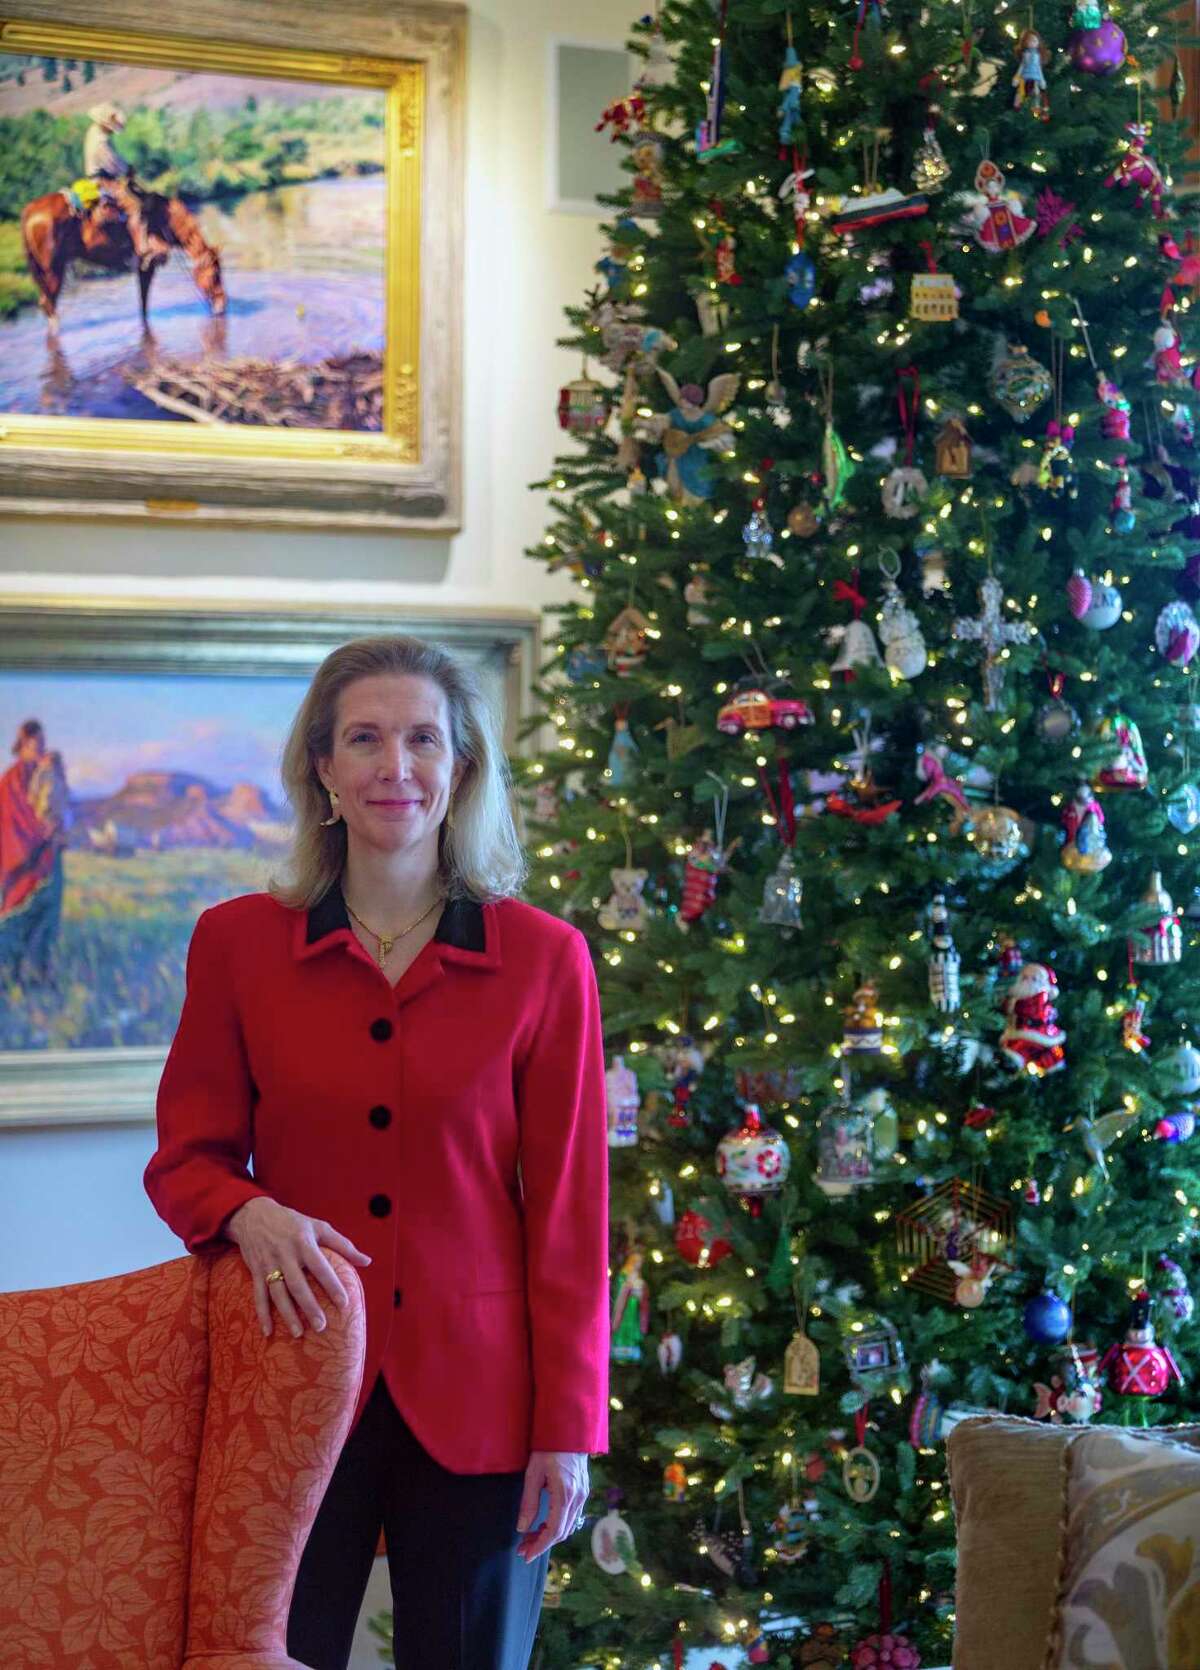 Abigail Kampmann in front of her Christmas tree. She decorated her home for Christmas early this year and inspired her friends to do the same.